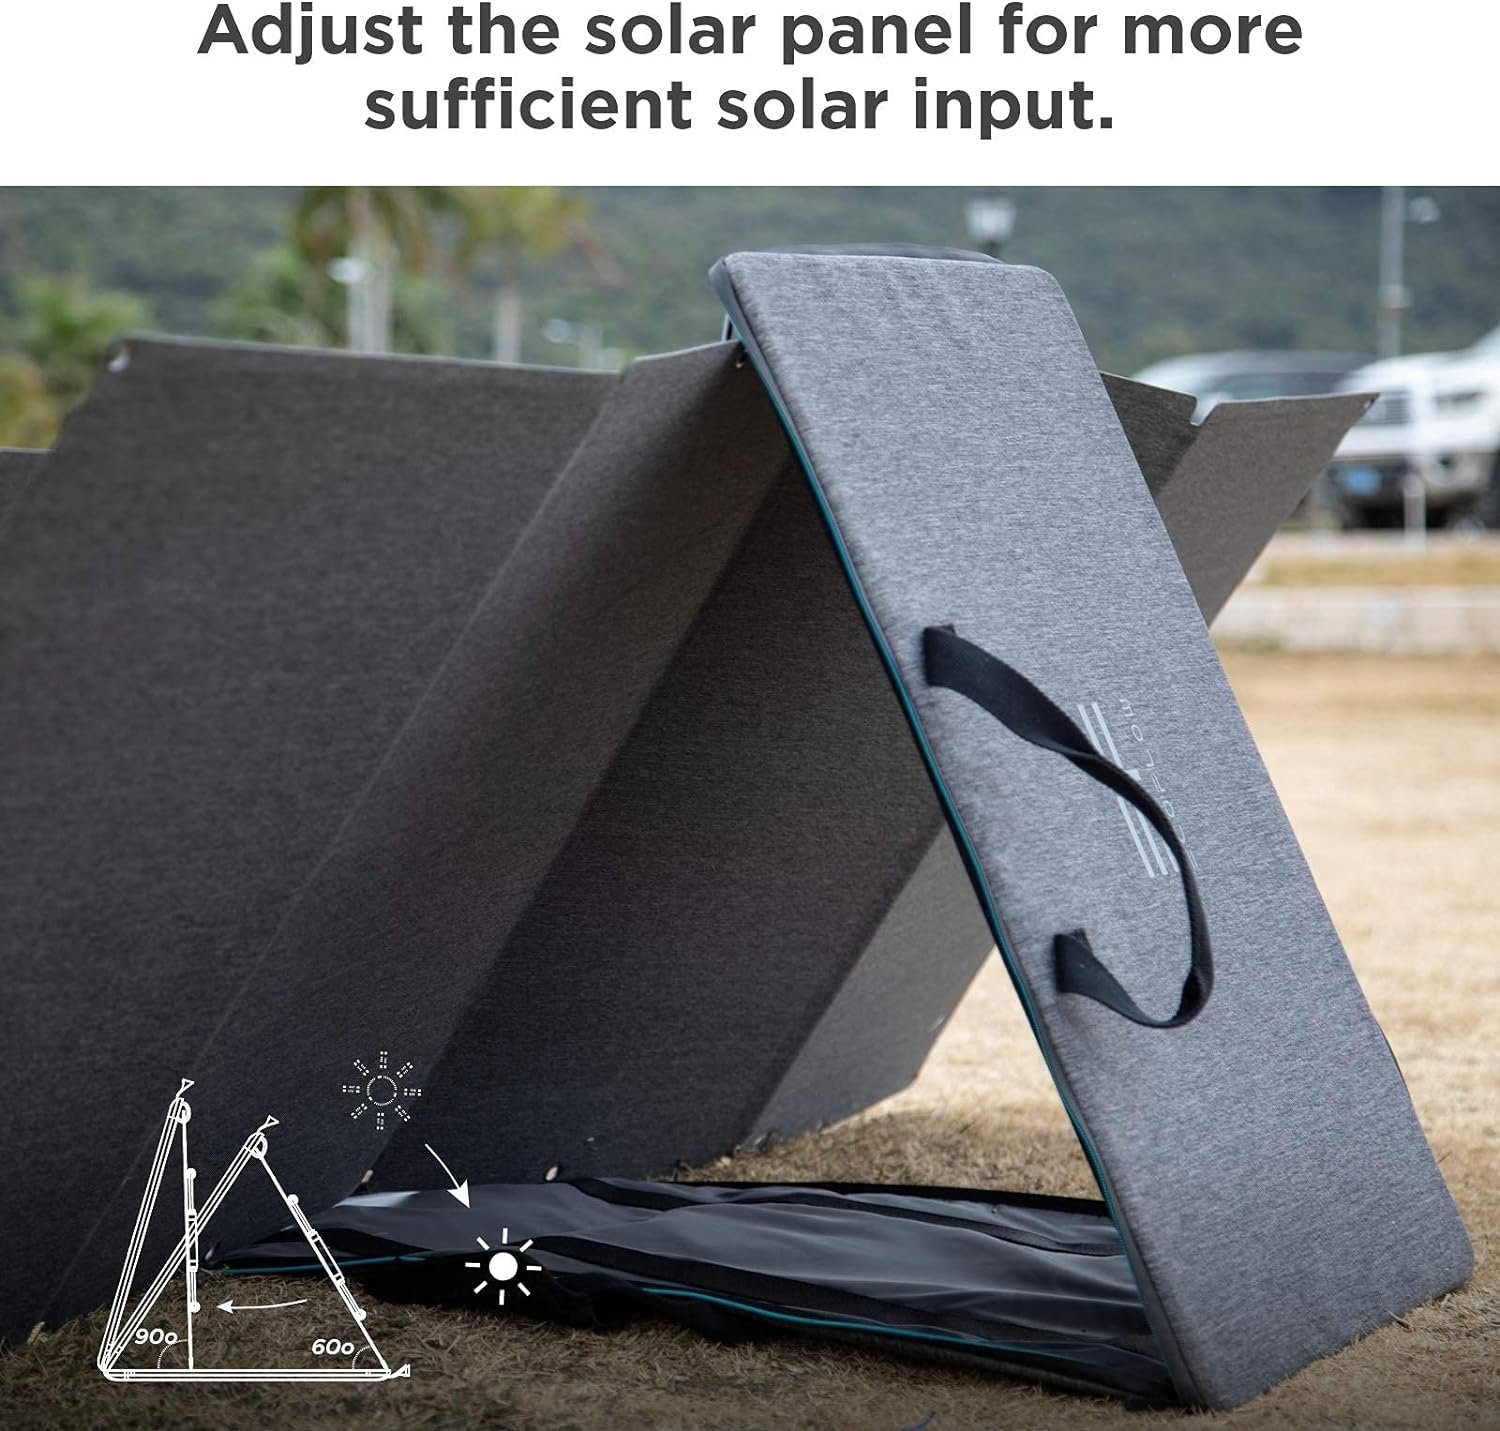 160W Solar Panel Review